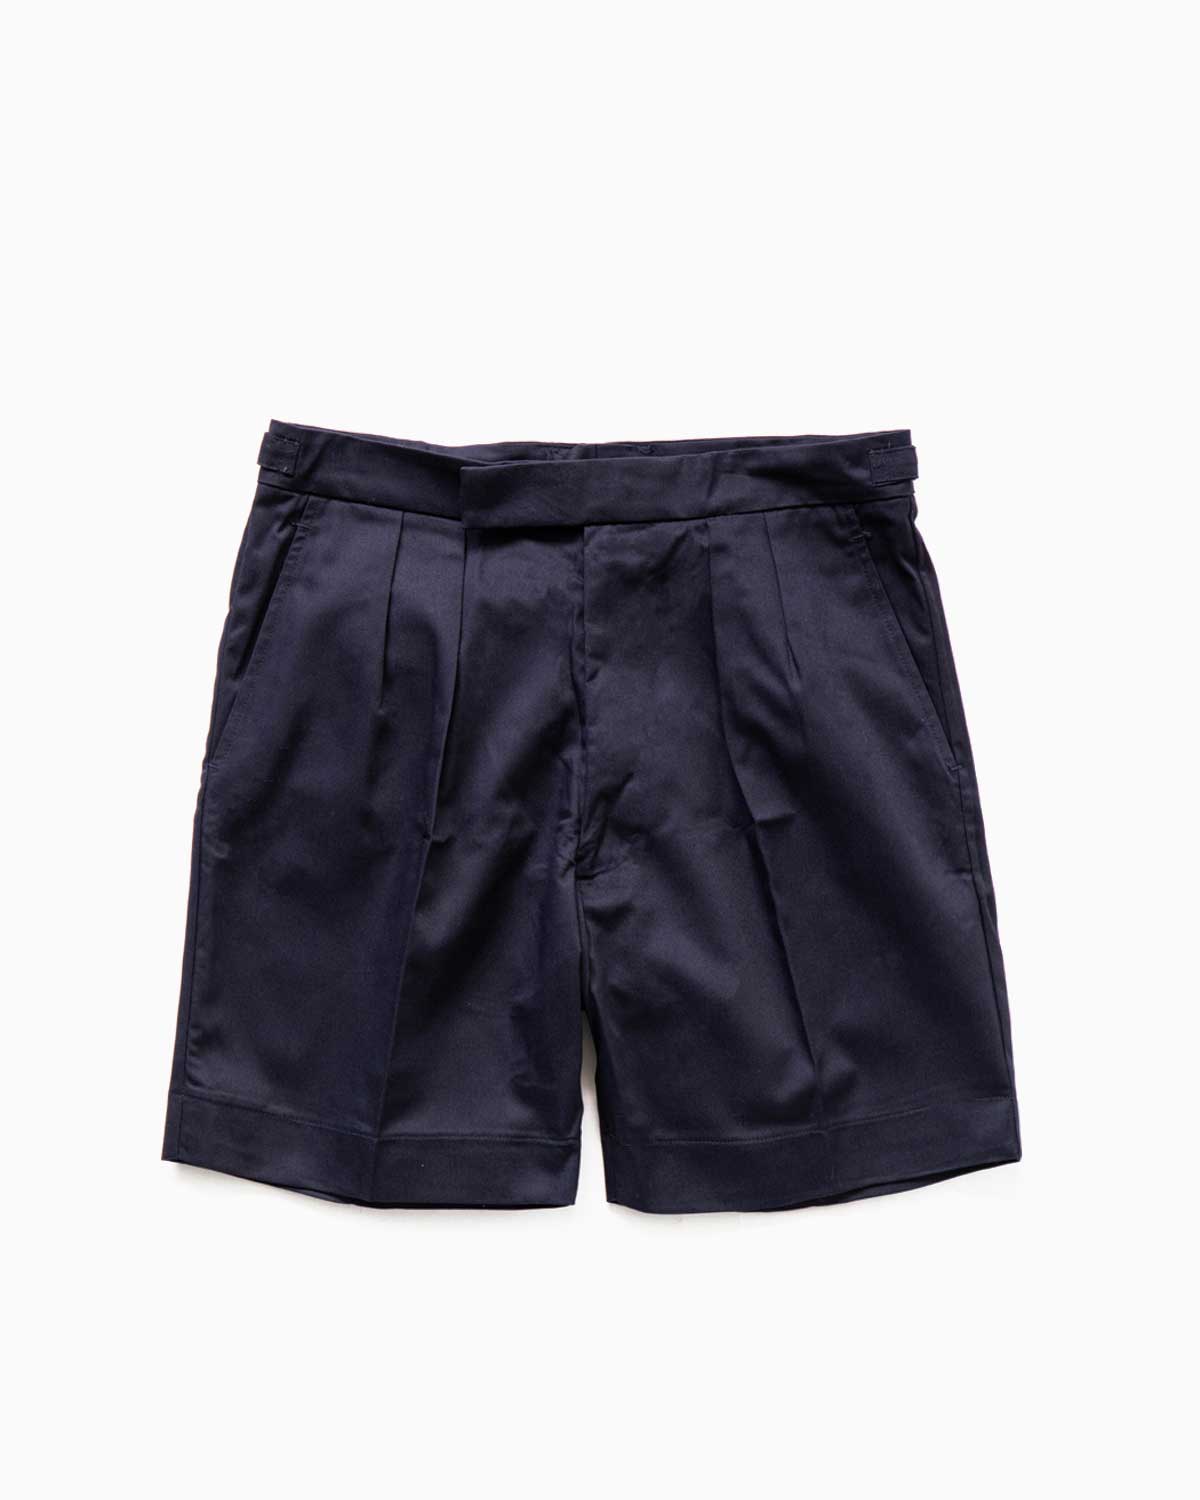 00s deadstock ROYAL NAVY ”two tuck shorts”